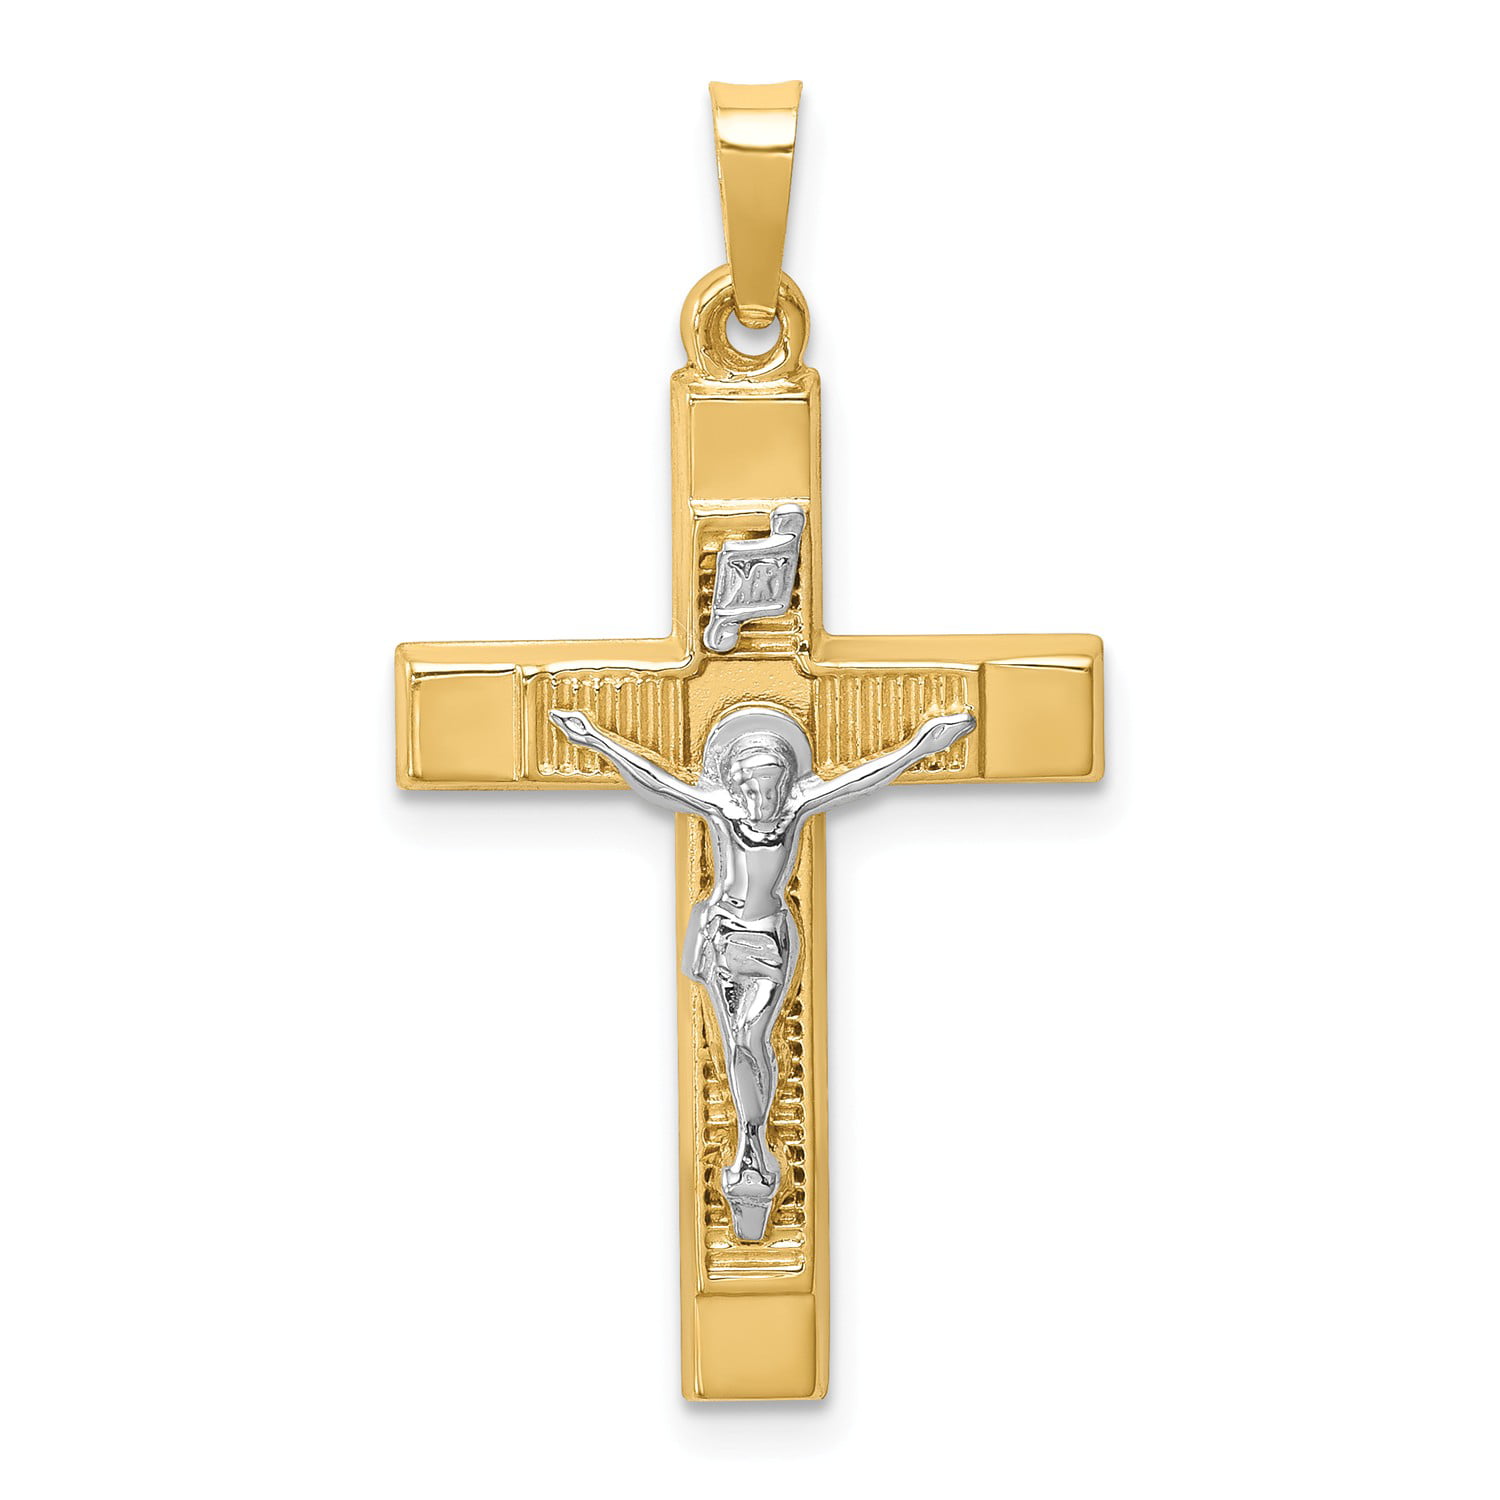 Sterling Silver Two-Tone Ornate Crucifix Cross Pendant Necklace 22